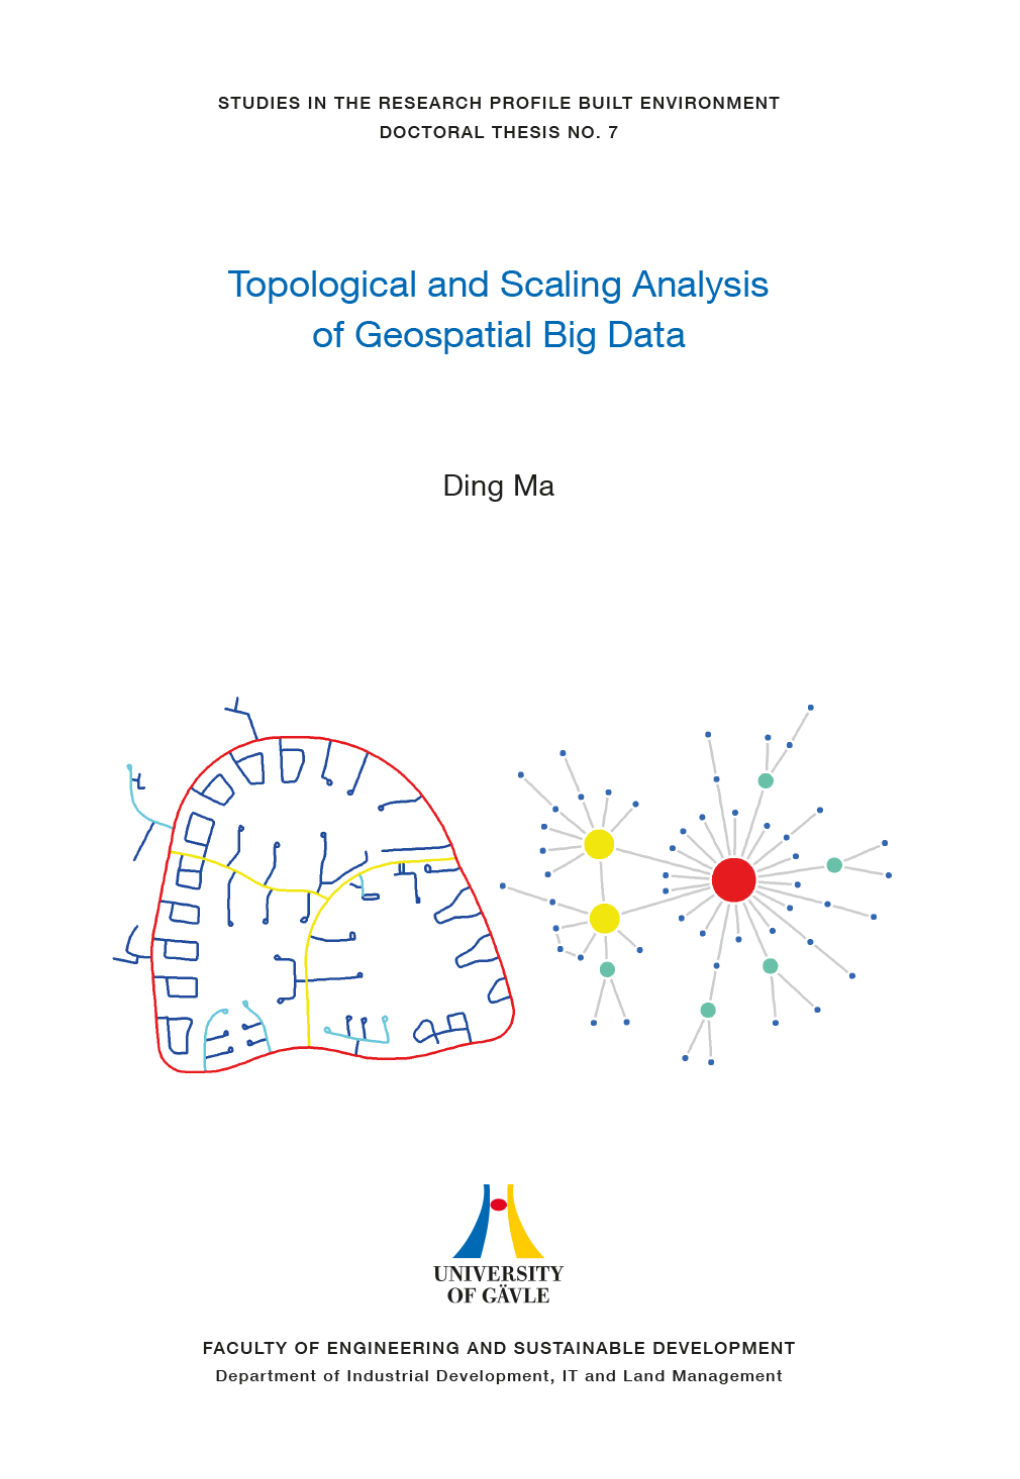 Topological and Scaling Analysis of Geospatial Big Data